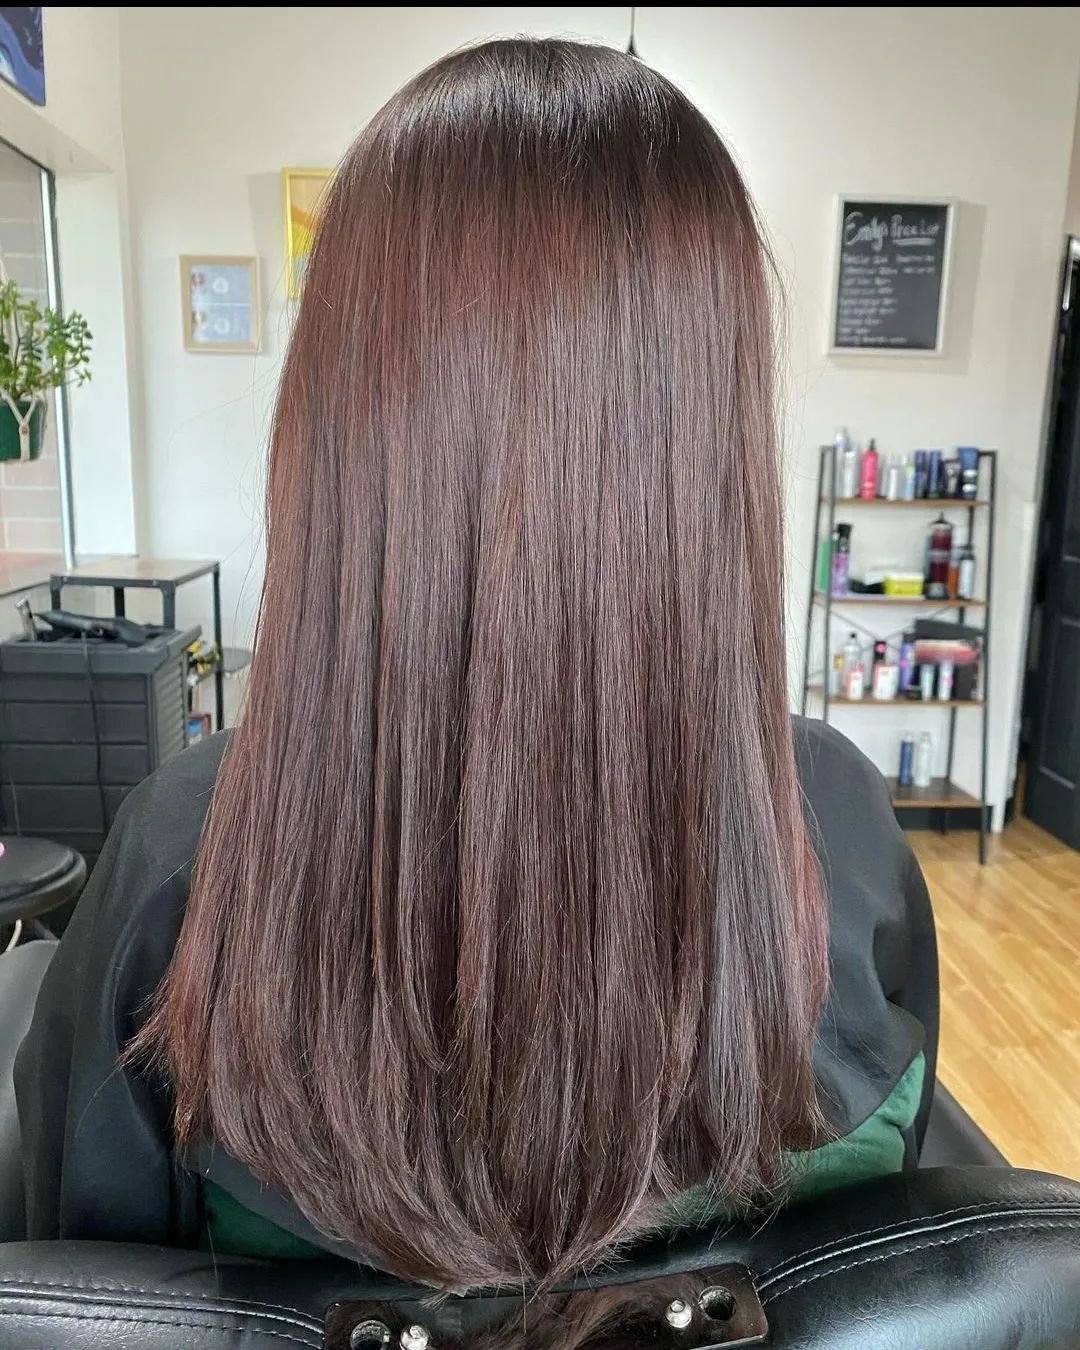 Beautiful Black Cherry color by @hairbylizzymoelder !
Lizzy is taking new clients message her or book online at canvasstudiosalon.online 
#haircolor # Binghamton #canvasstudiosalonbing